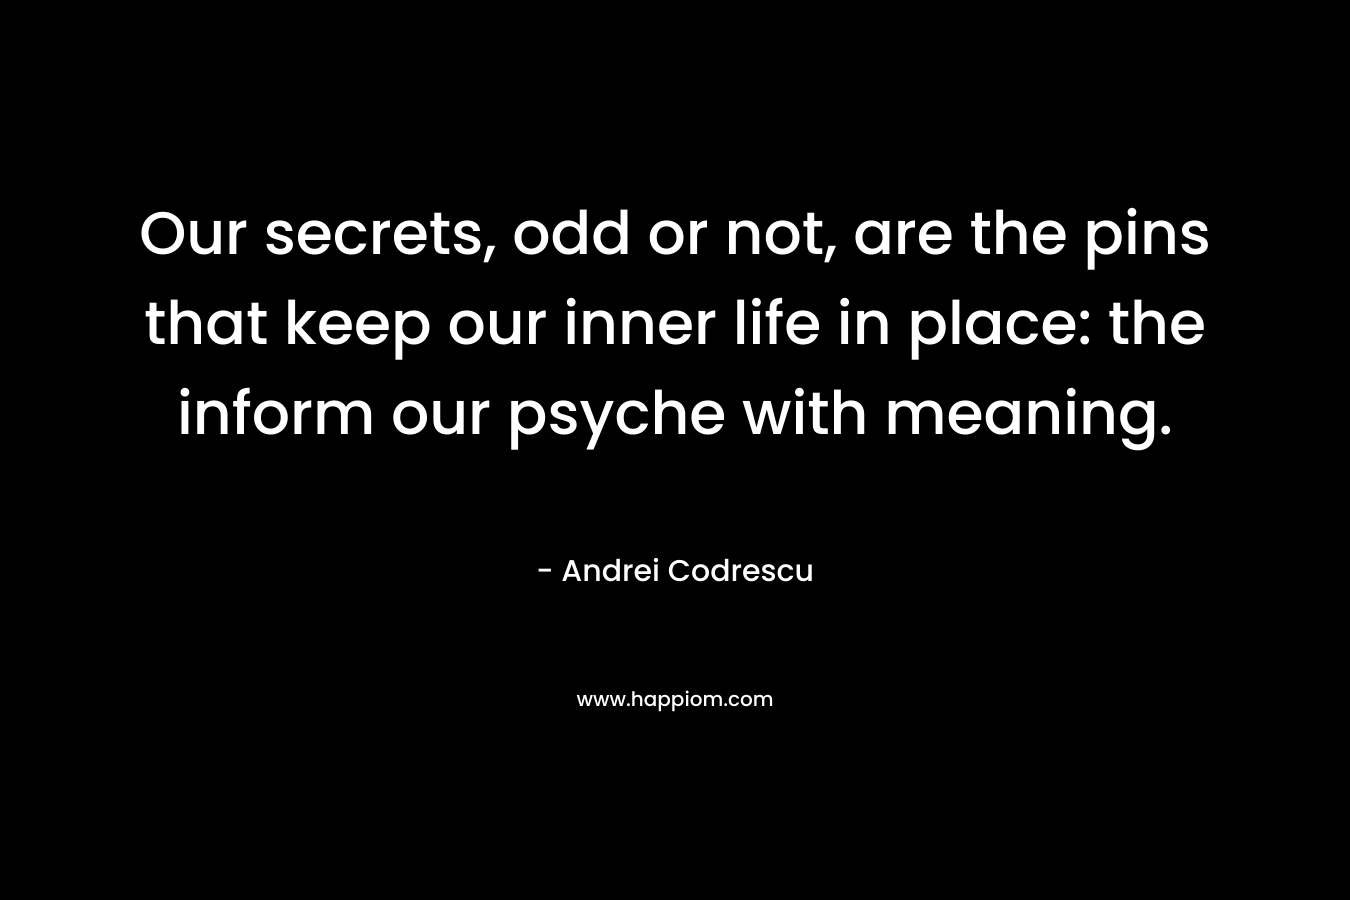 Our secrets, odd or not, are the pins that keep our inner life in place: the inform our psyche with meaning.